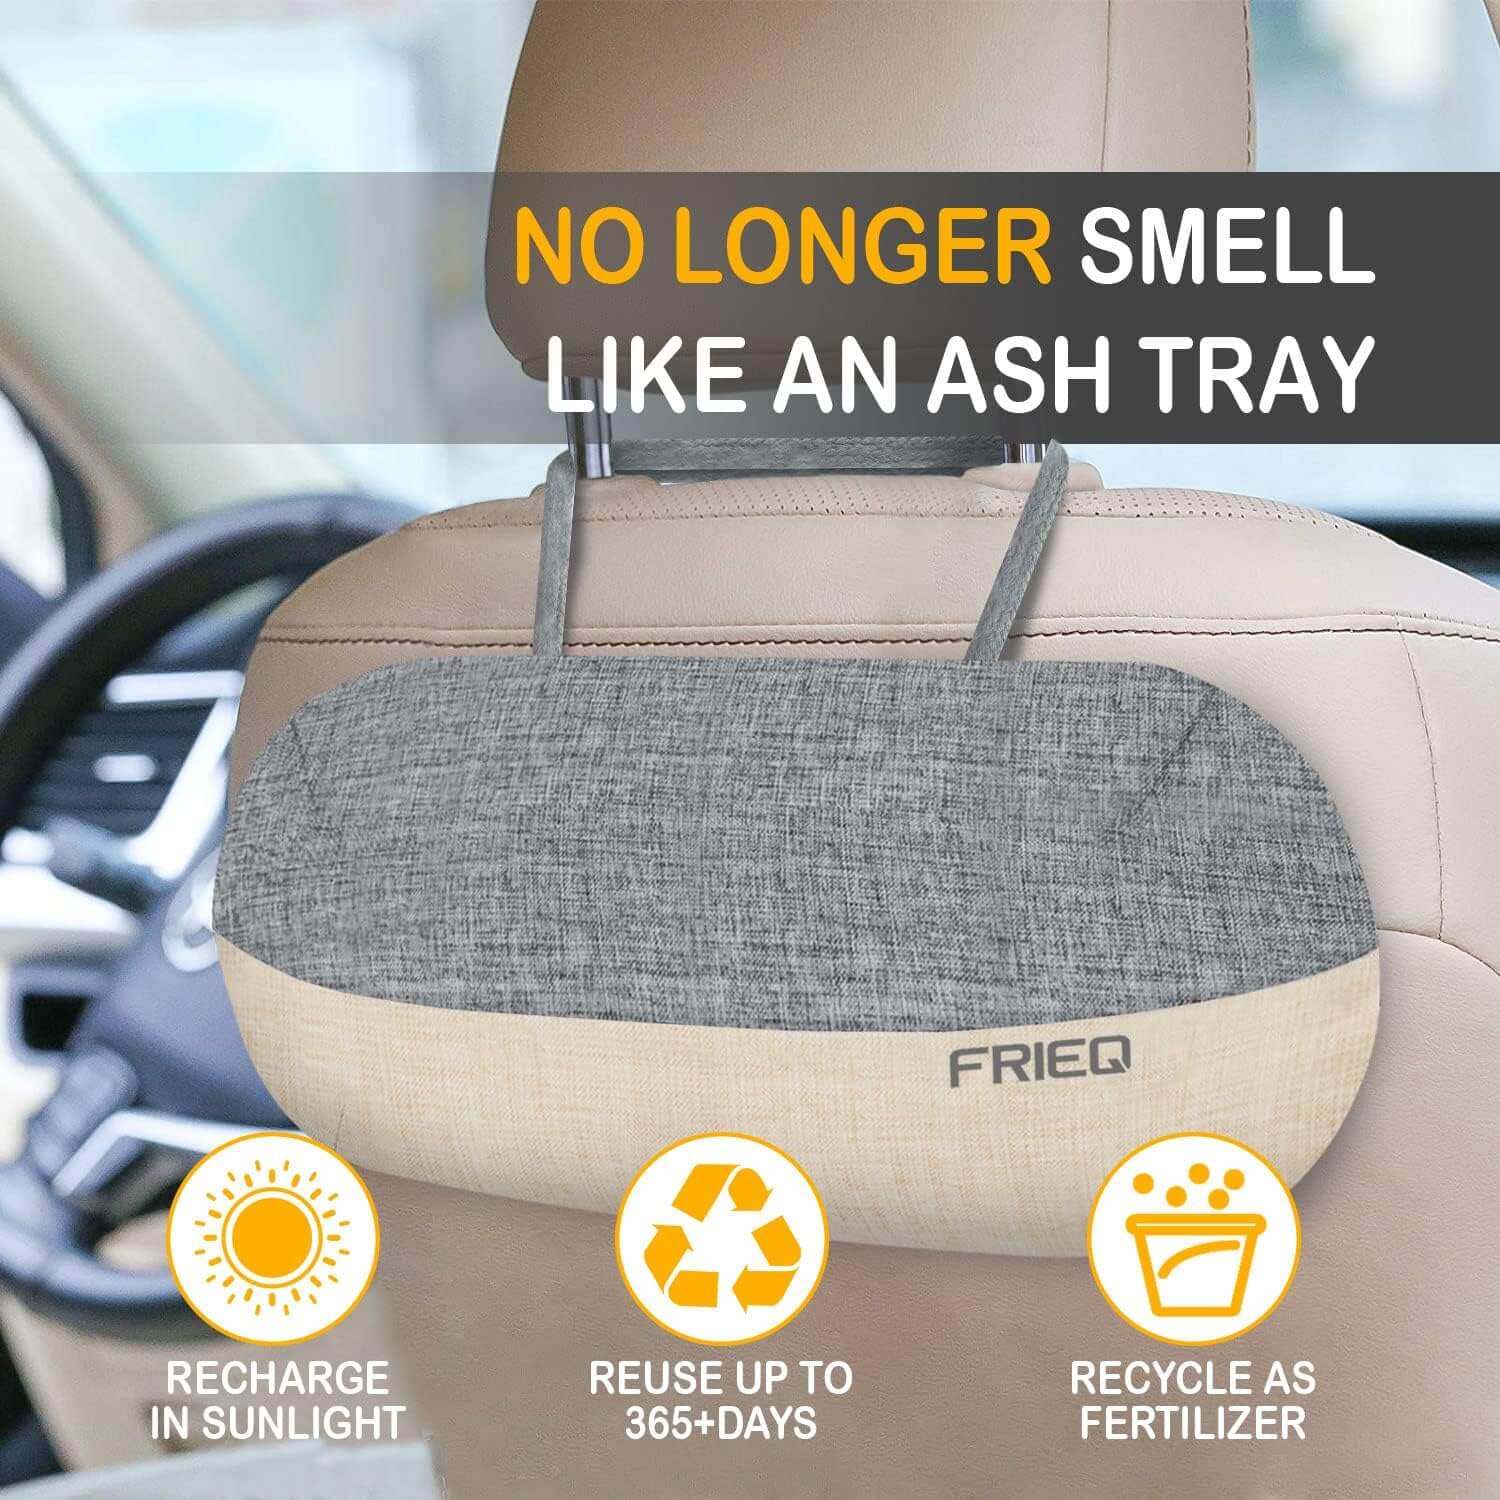 FRiEQ Car Air Freshener, 100% Activated Bamboo Charcoal Air Purifying Bag | Lasts 365+ Days | Fragrance-Free Deodorizer - Absorb Smoke Smell and Bad Odors（2 Pack） - NO Longer Smell Like An Ash Tray